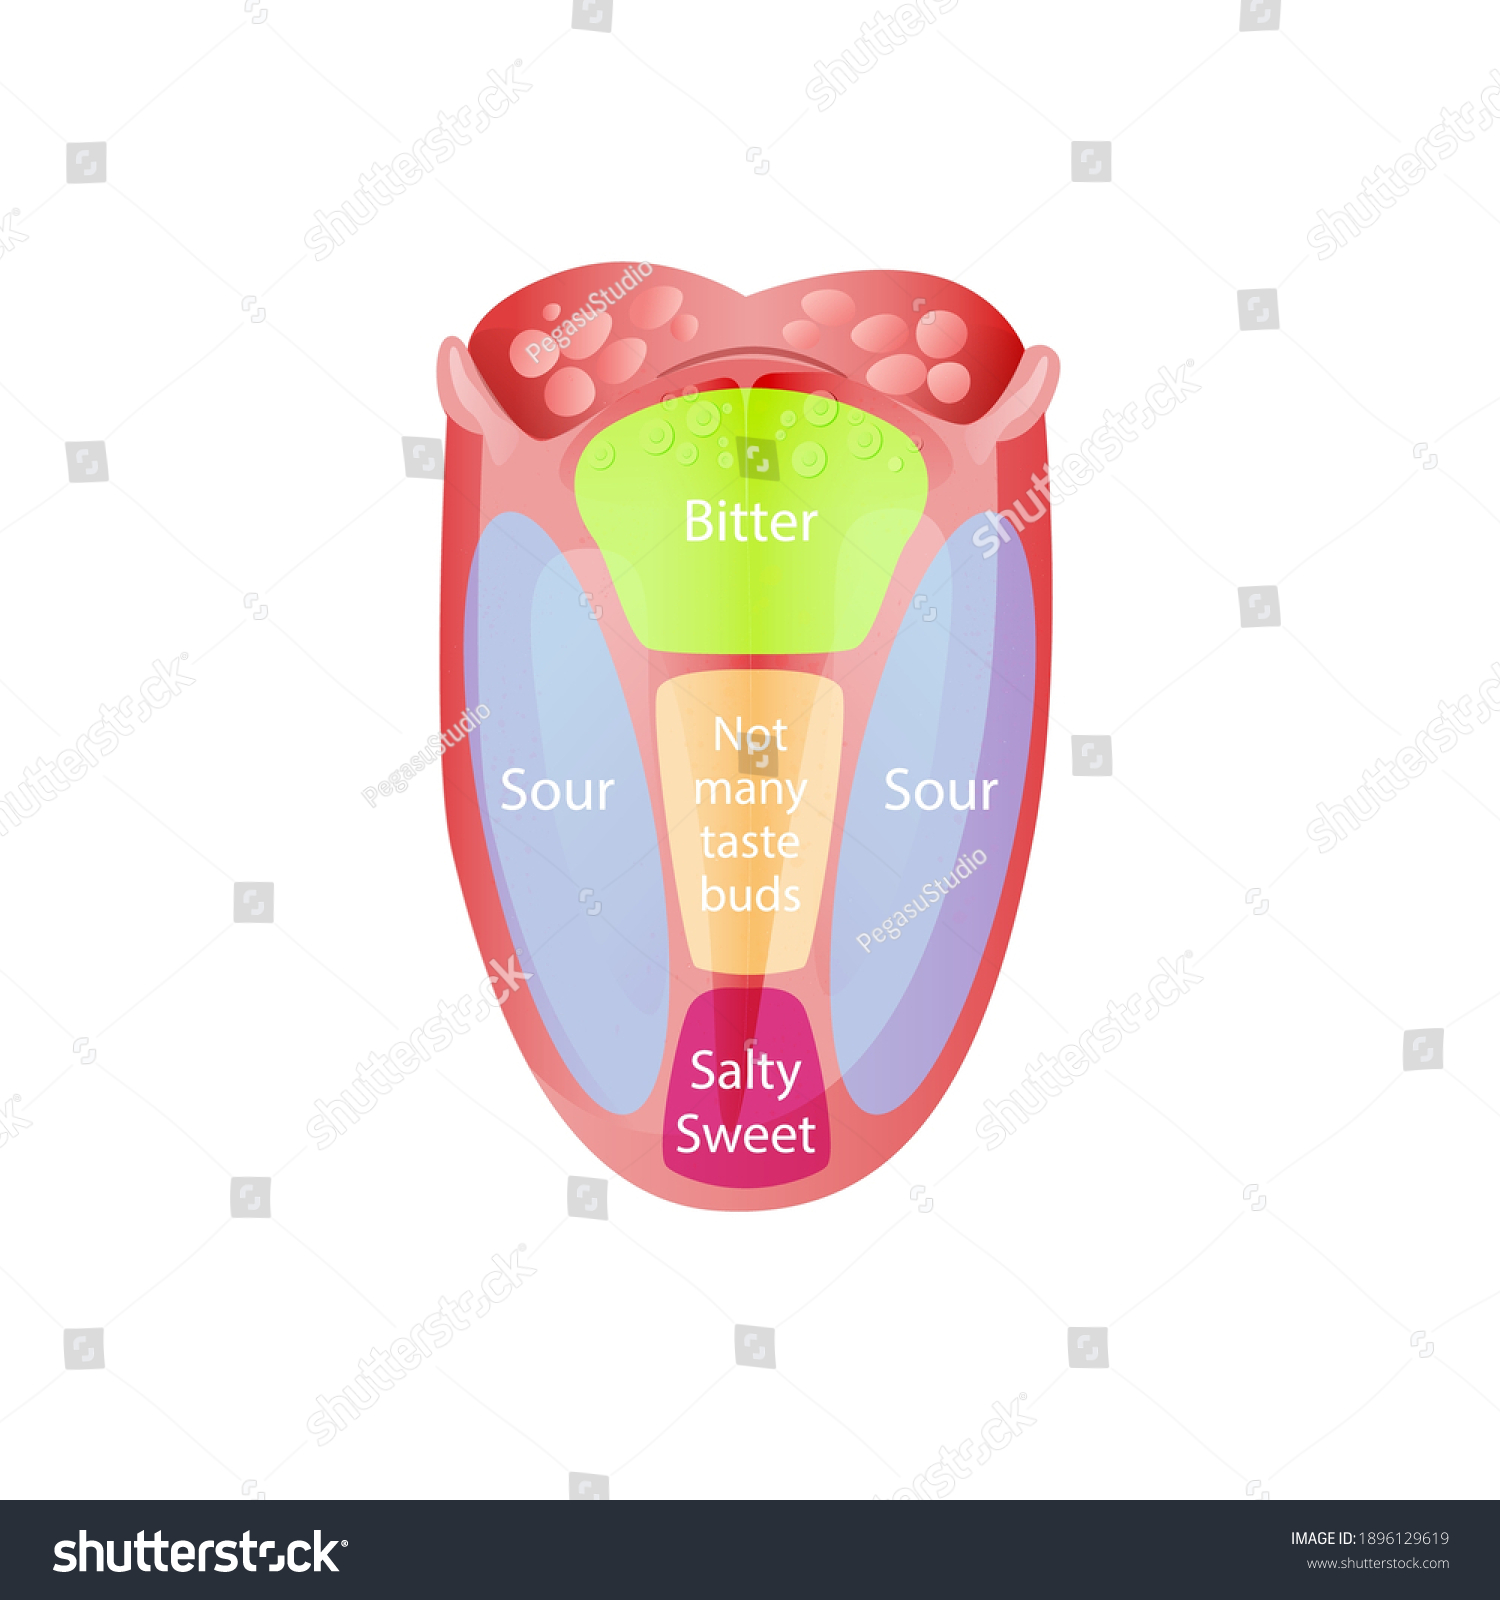 Taste Zones On Tongue Green Bitter Stock Vector (Royalty Free) 1896129619